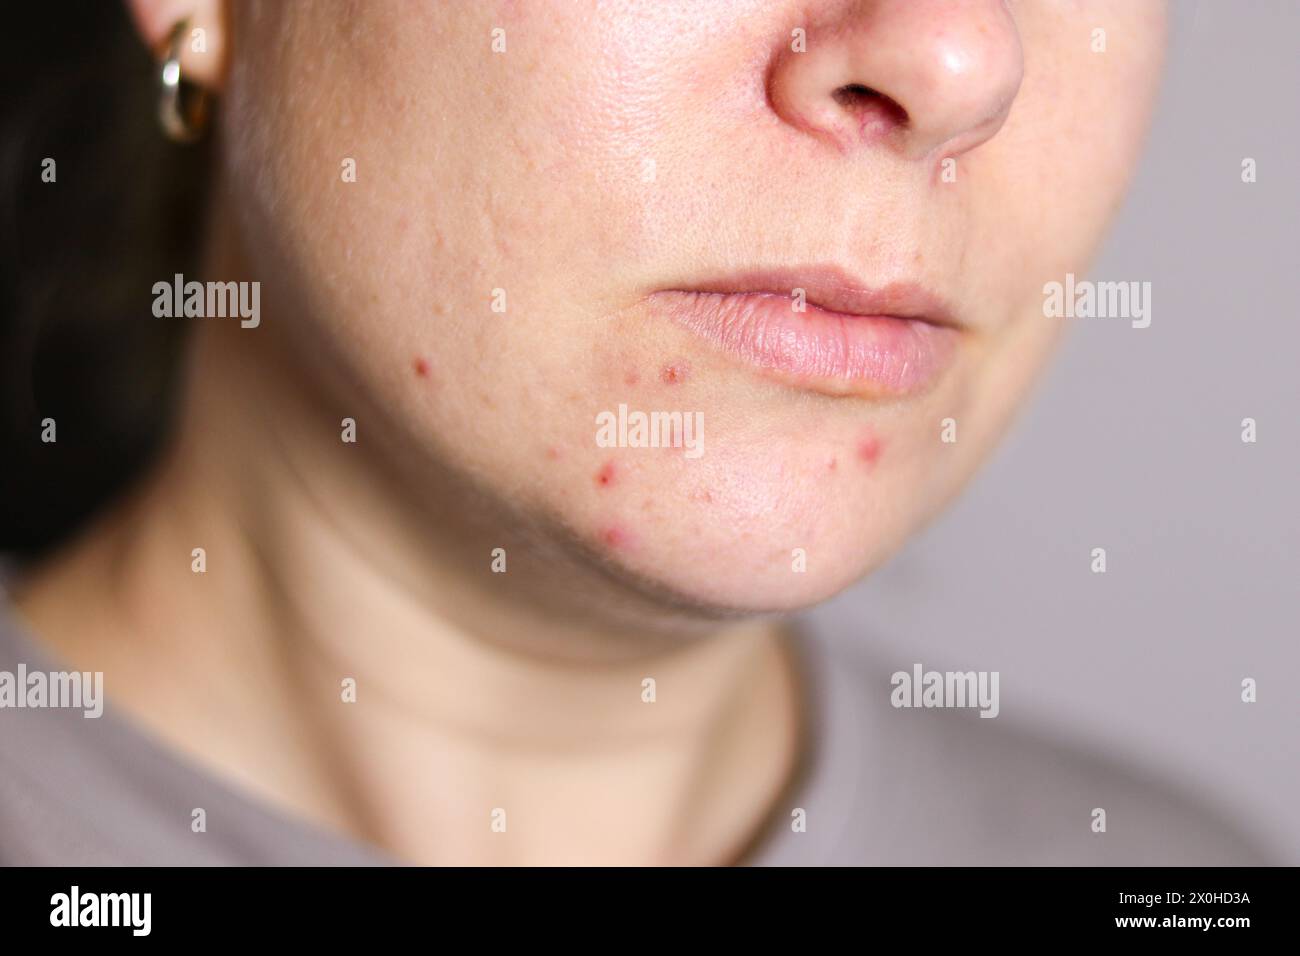 Close up of female face with red problematic acne skin, blurry background Stock Photo